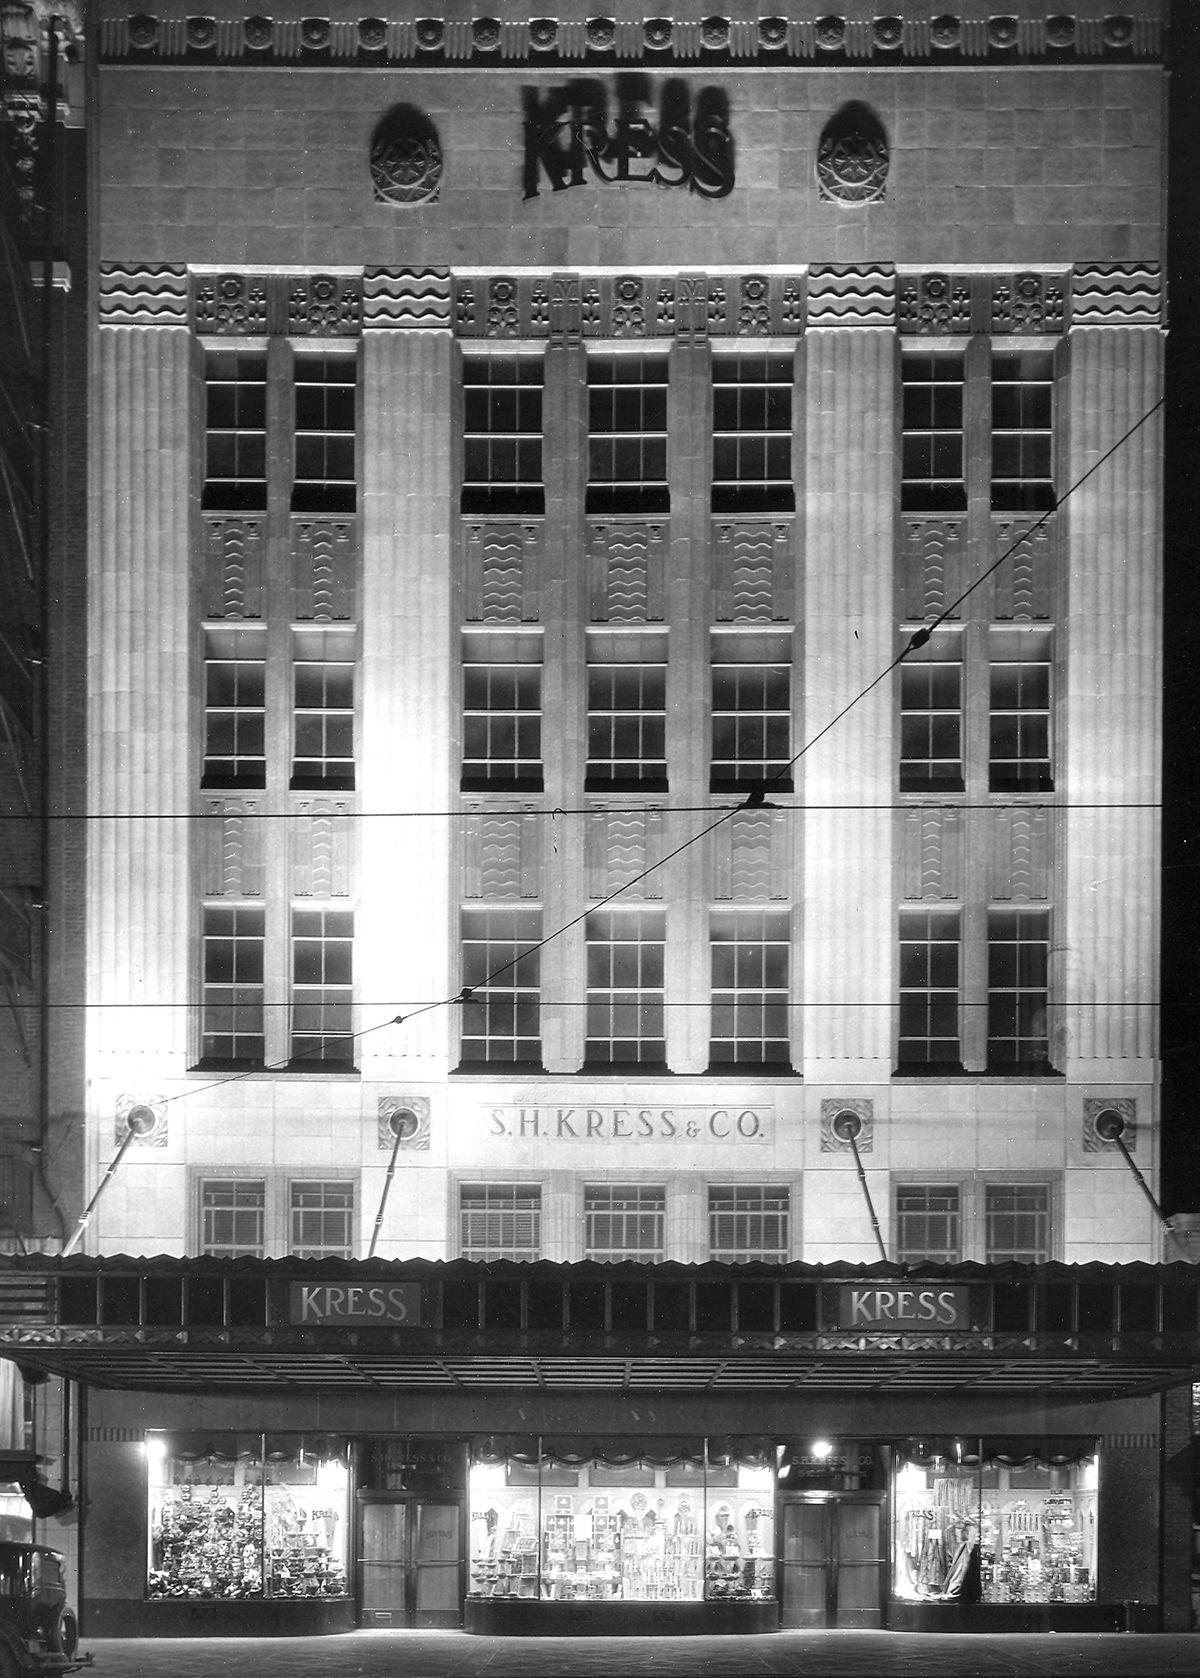 1936: The S.H. Kress and Co. store on Main Avenue in Spokane was an upscale discount store and part of a large chain that was started Samuel H. Kress. Spokane’s store closed in the 1960s, and in the 1970s the building was incorporated into the River Park Square mall. (Spokesman-Review Photo Archive)